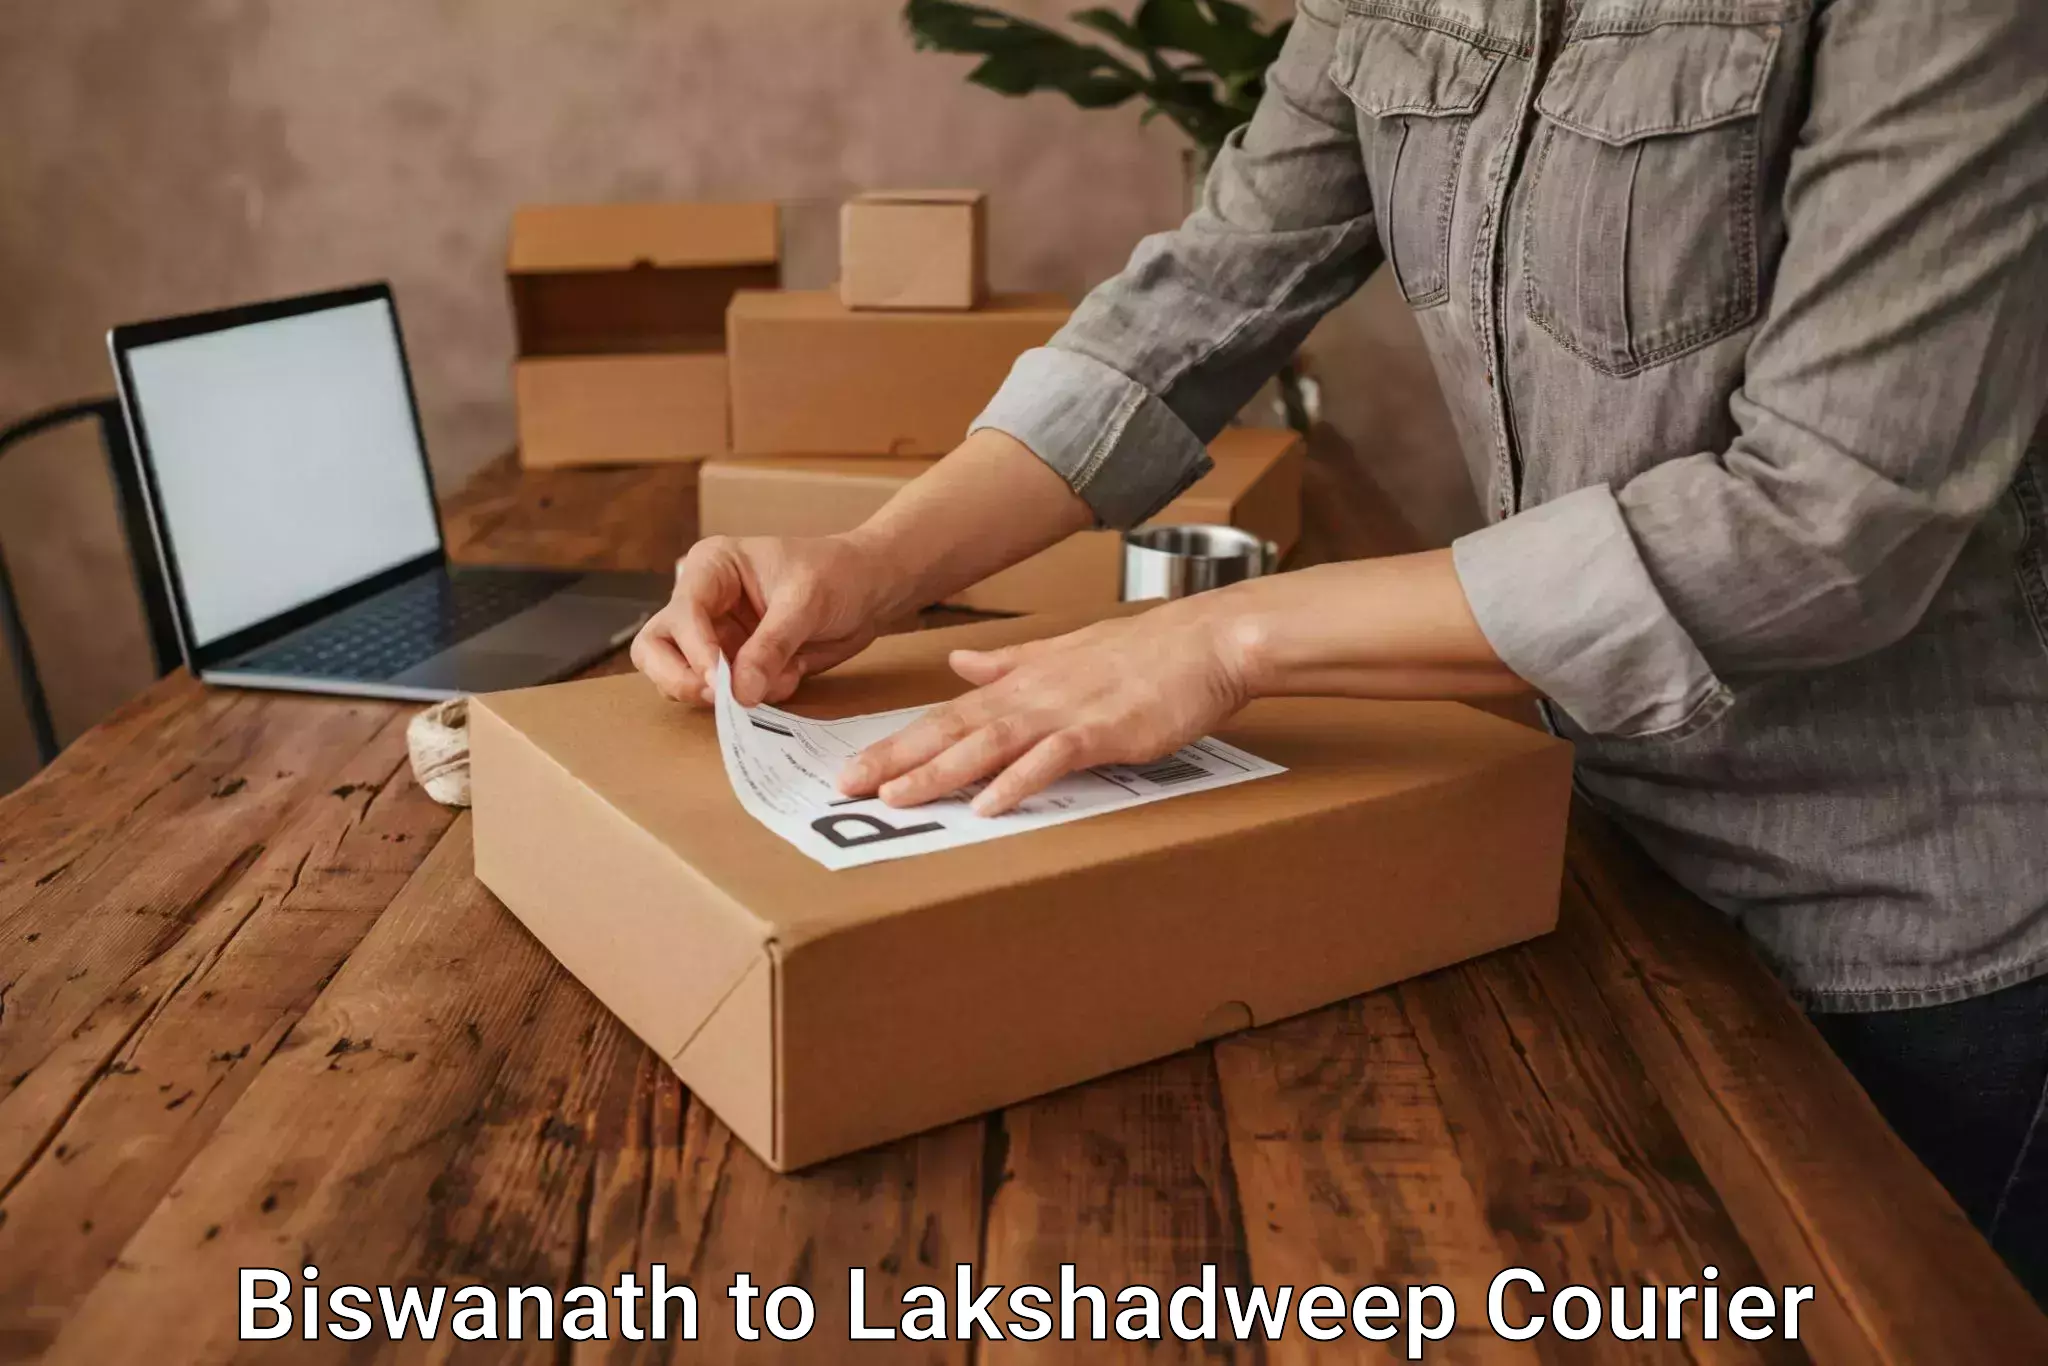 Reliable delivery network Biswanath to Lakshadweep